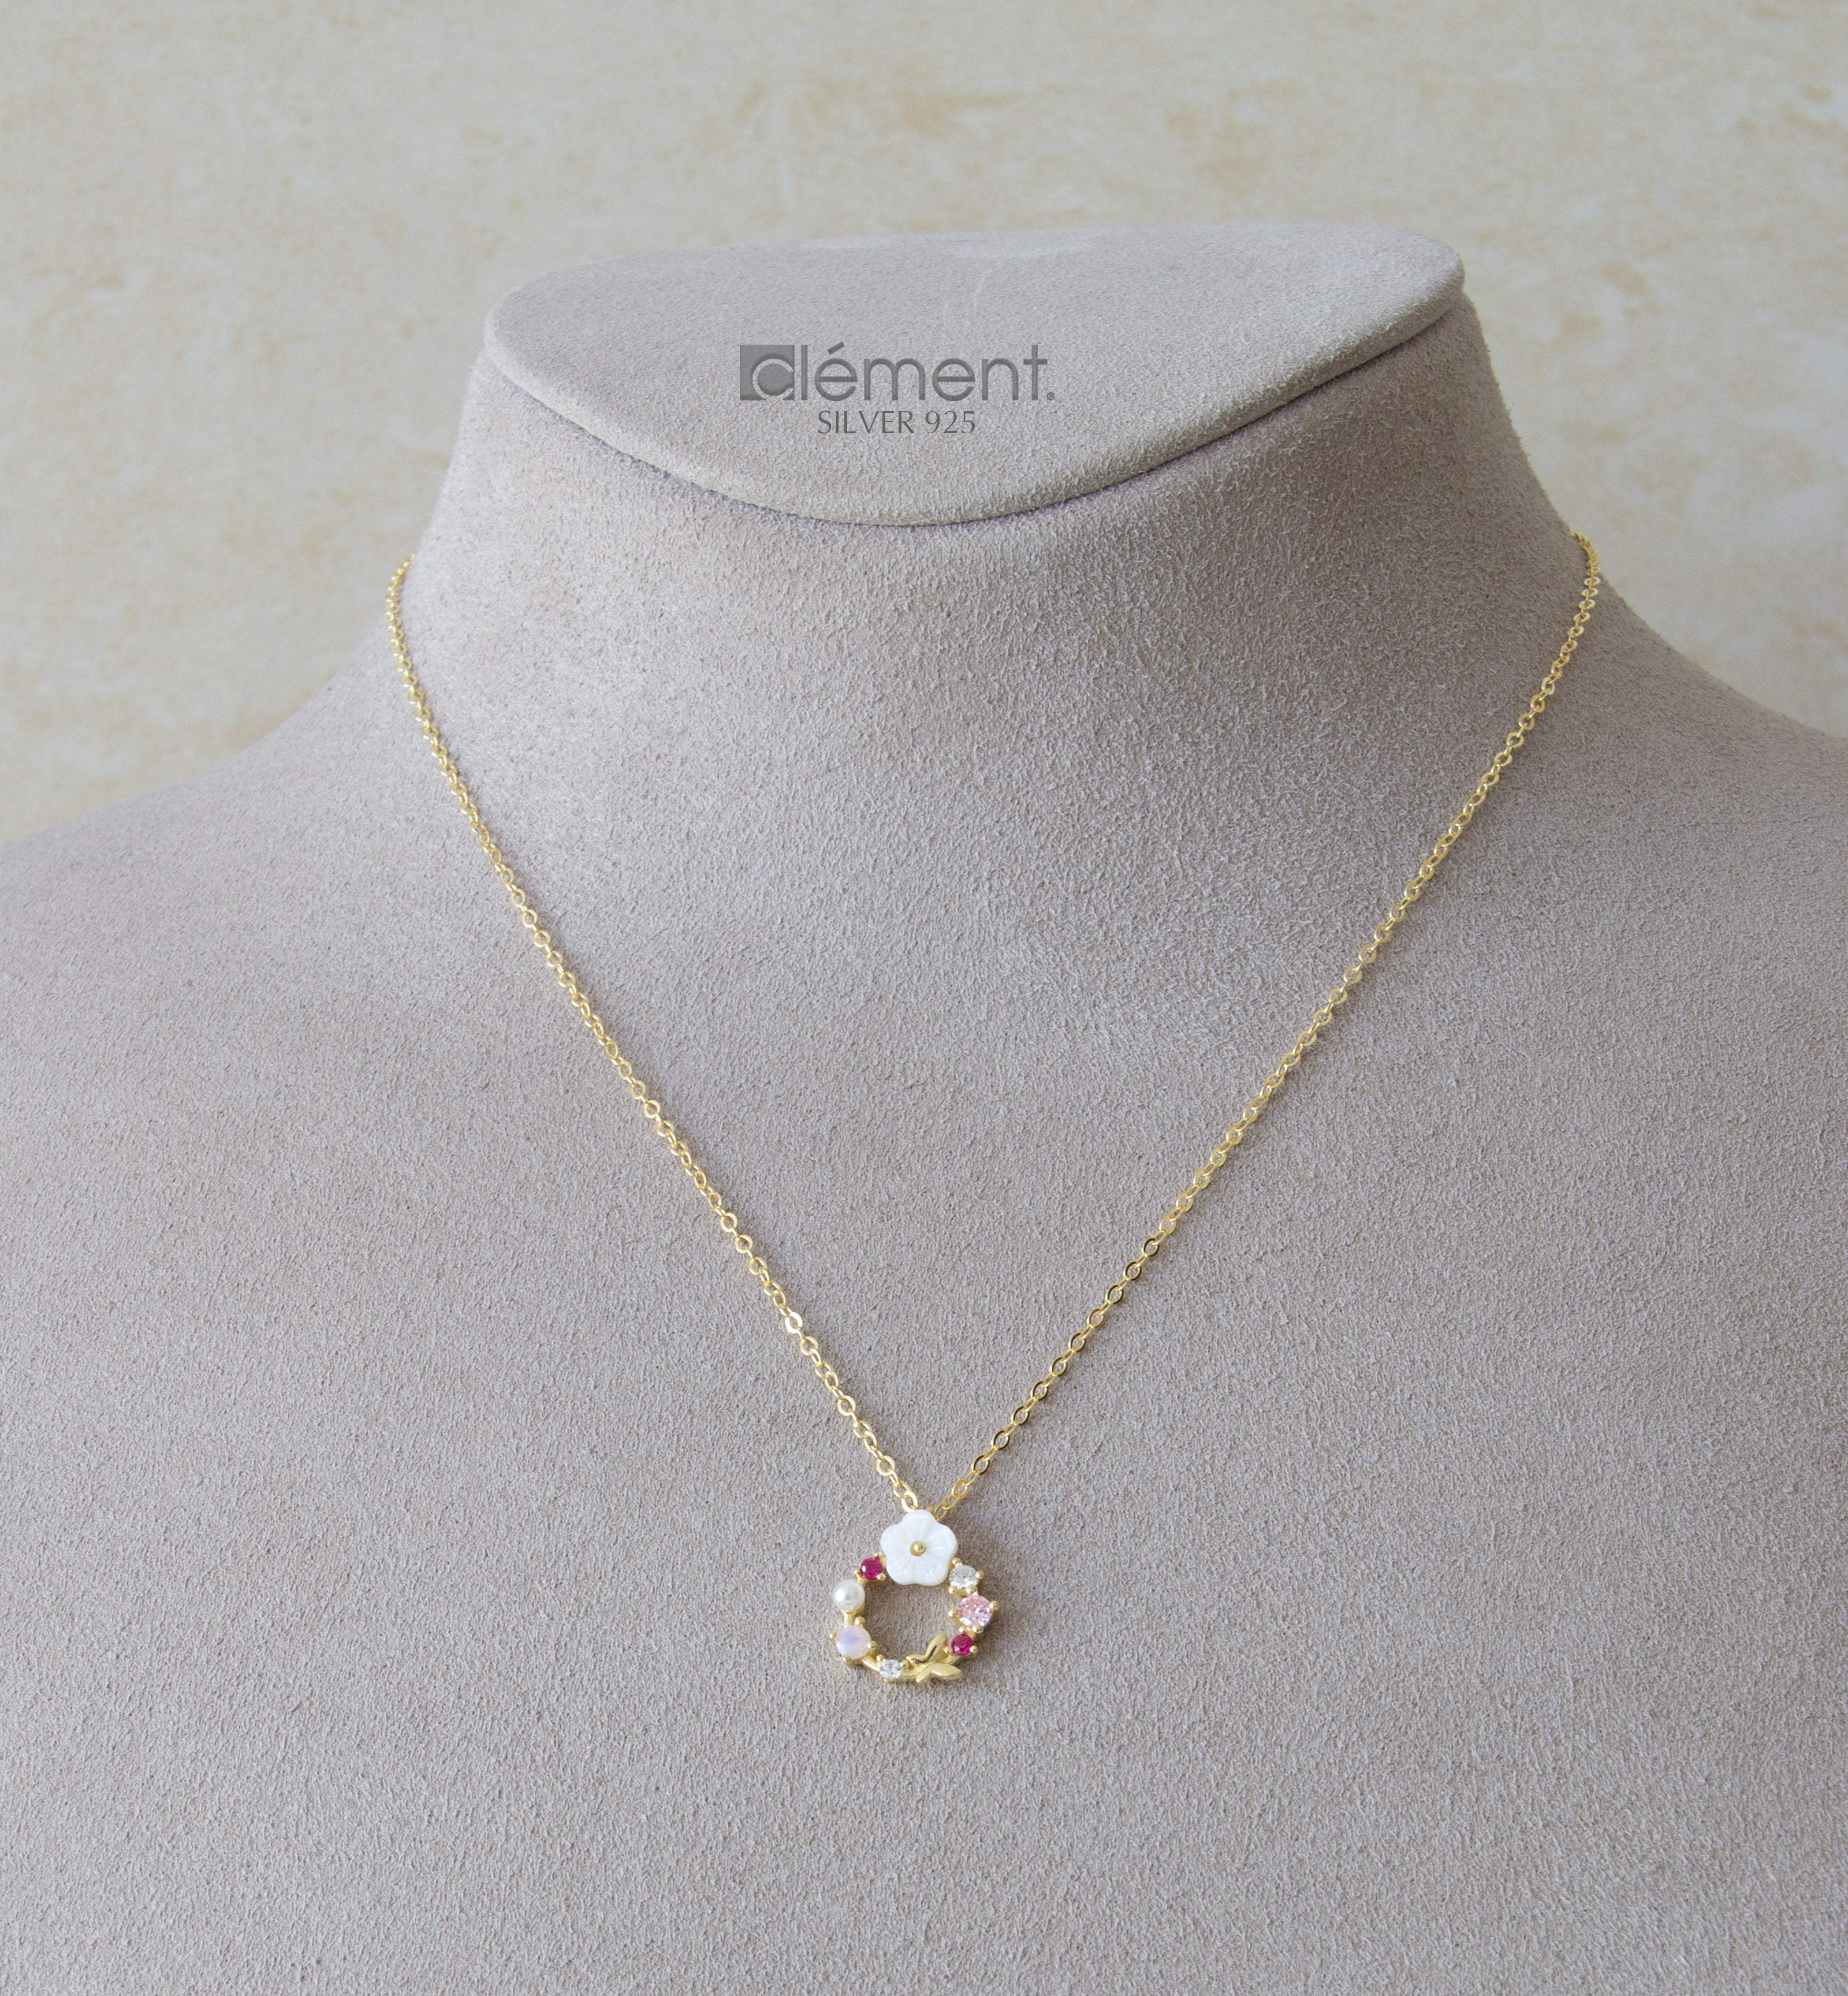 Silver 925 Yellow Gold Necklace